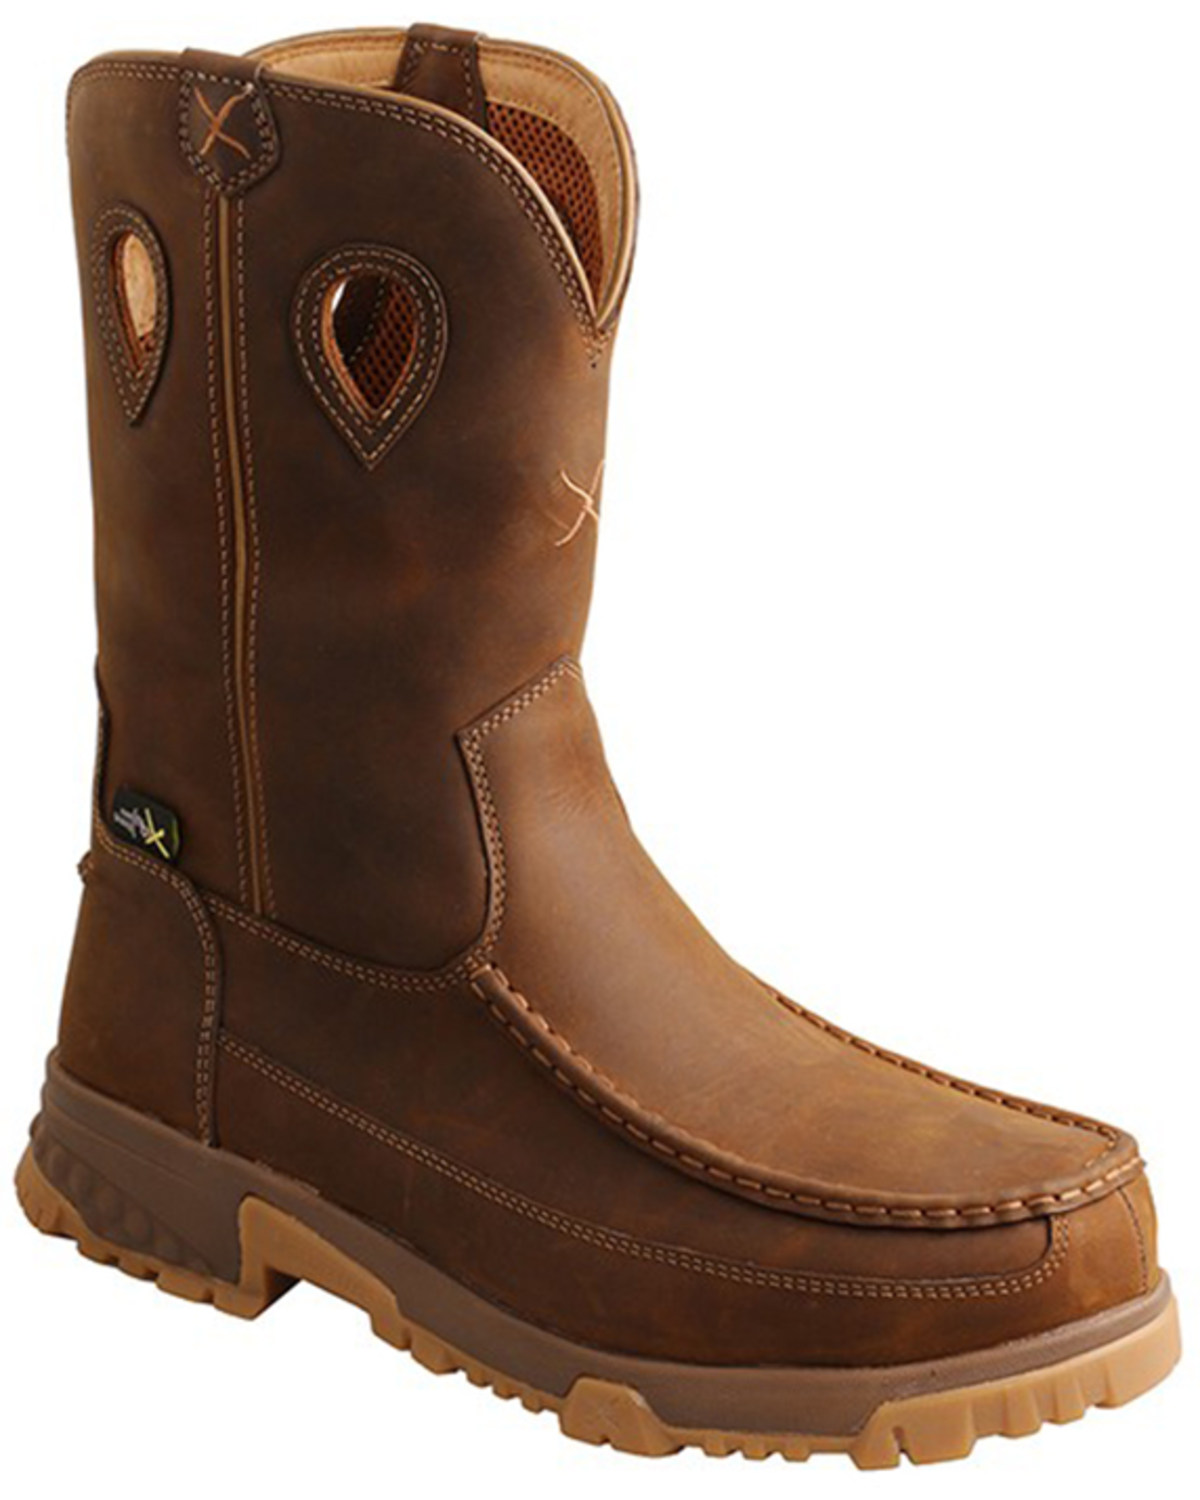 Twisted X Men's CellStretch Met Guard Western Work Boots - Nano Composte Toe